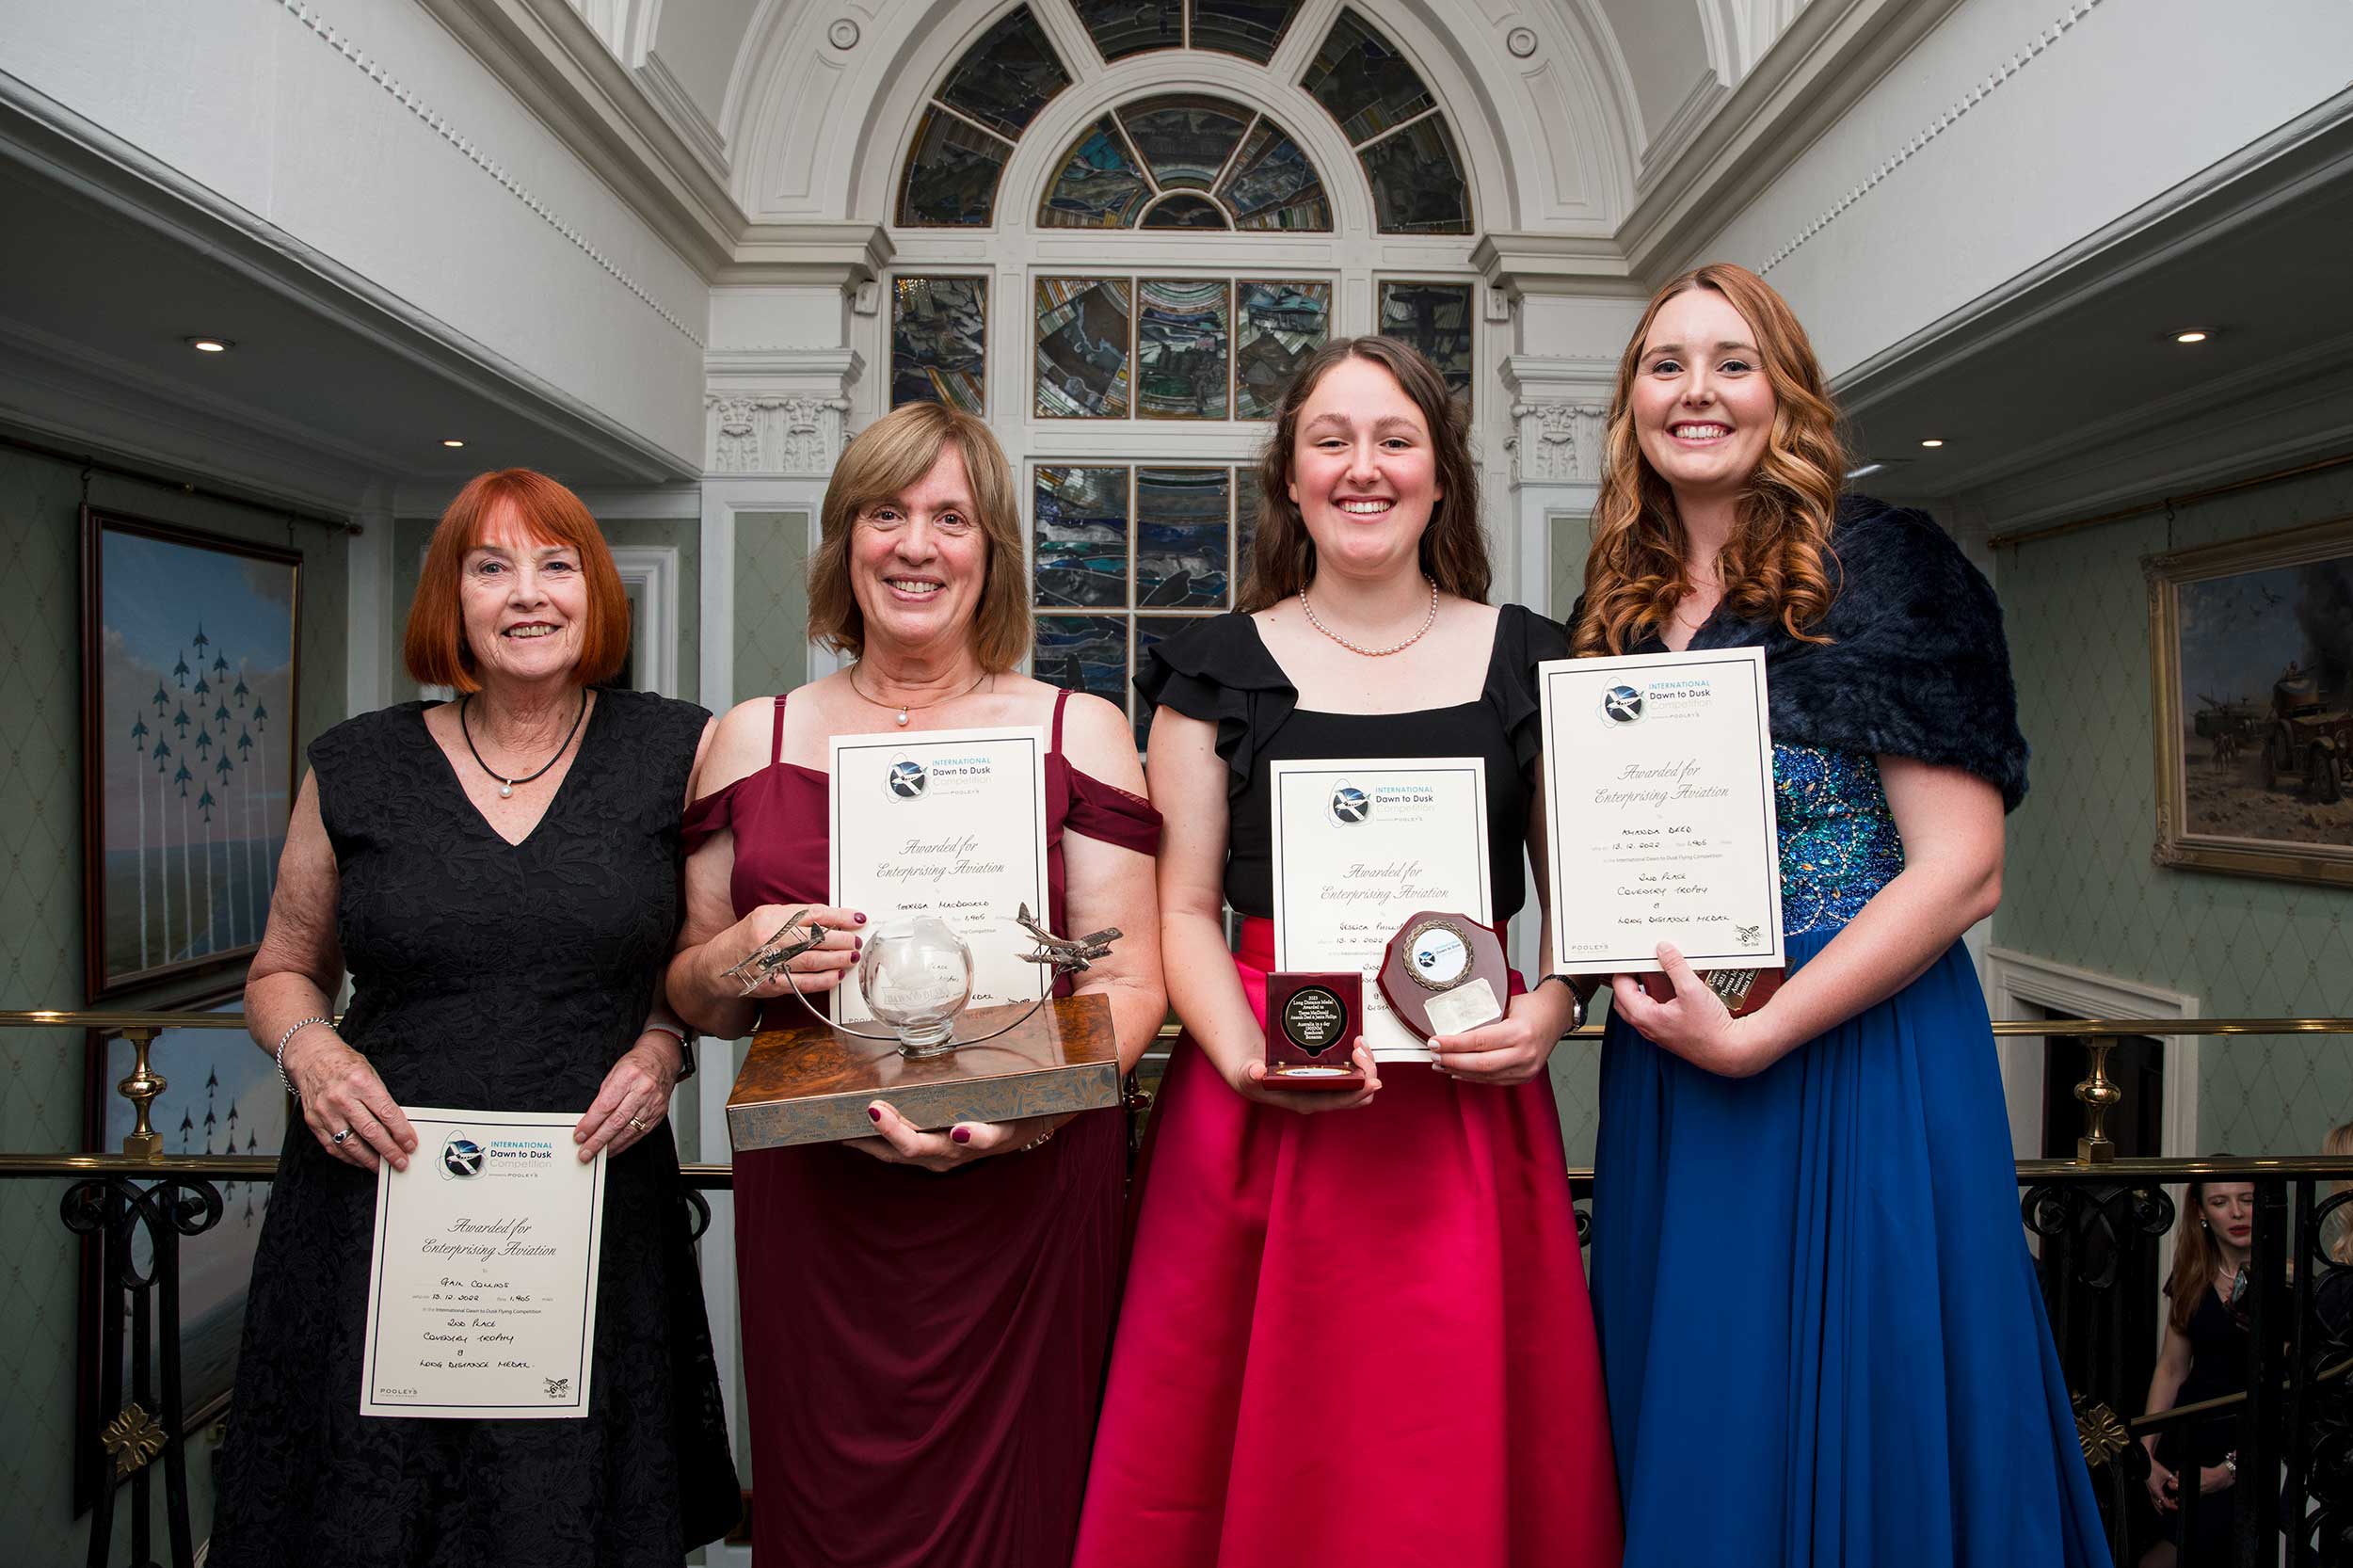 Coventry Trophy winners! From left: Gail Collings, Teresa MacDonald, Jessica Phillips and Amanda Deed